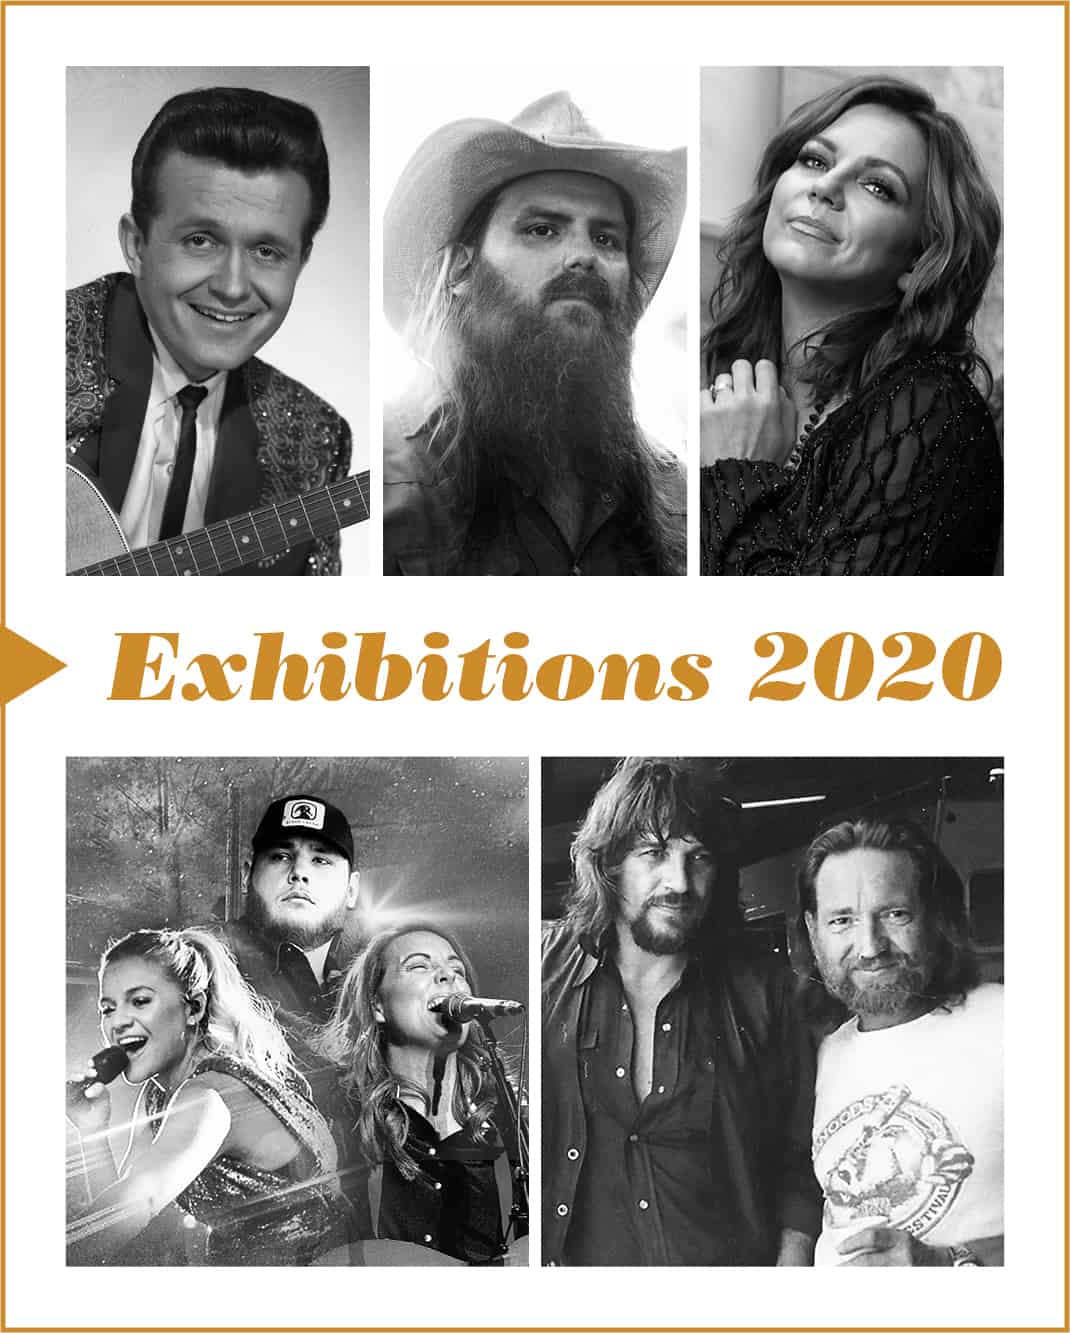 COUNTRY MUSIC HALL OF FAME AND MUSEUM ANNOUNCES 2020 EXHIBITION